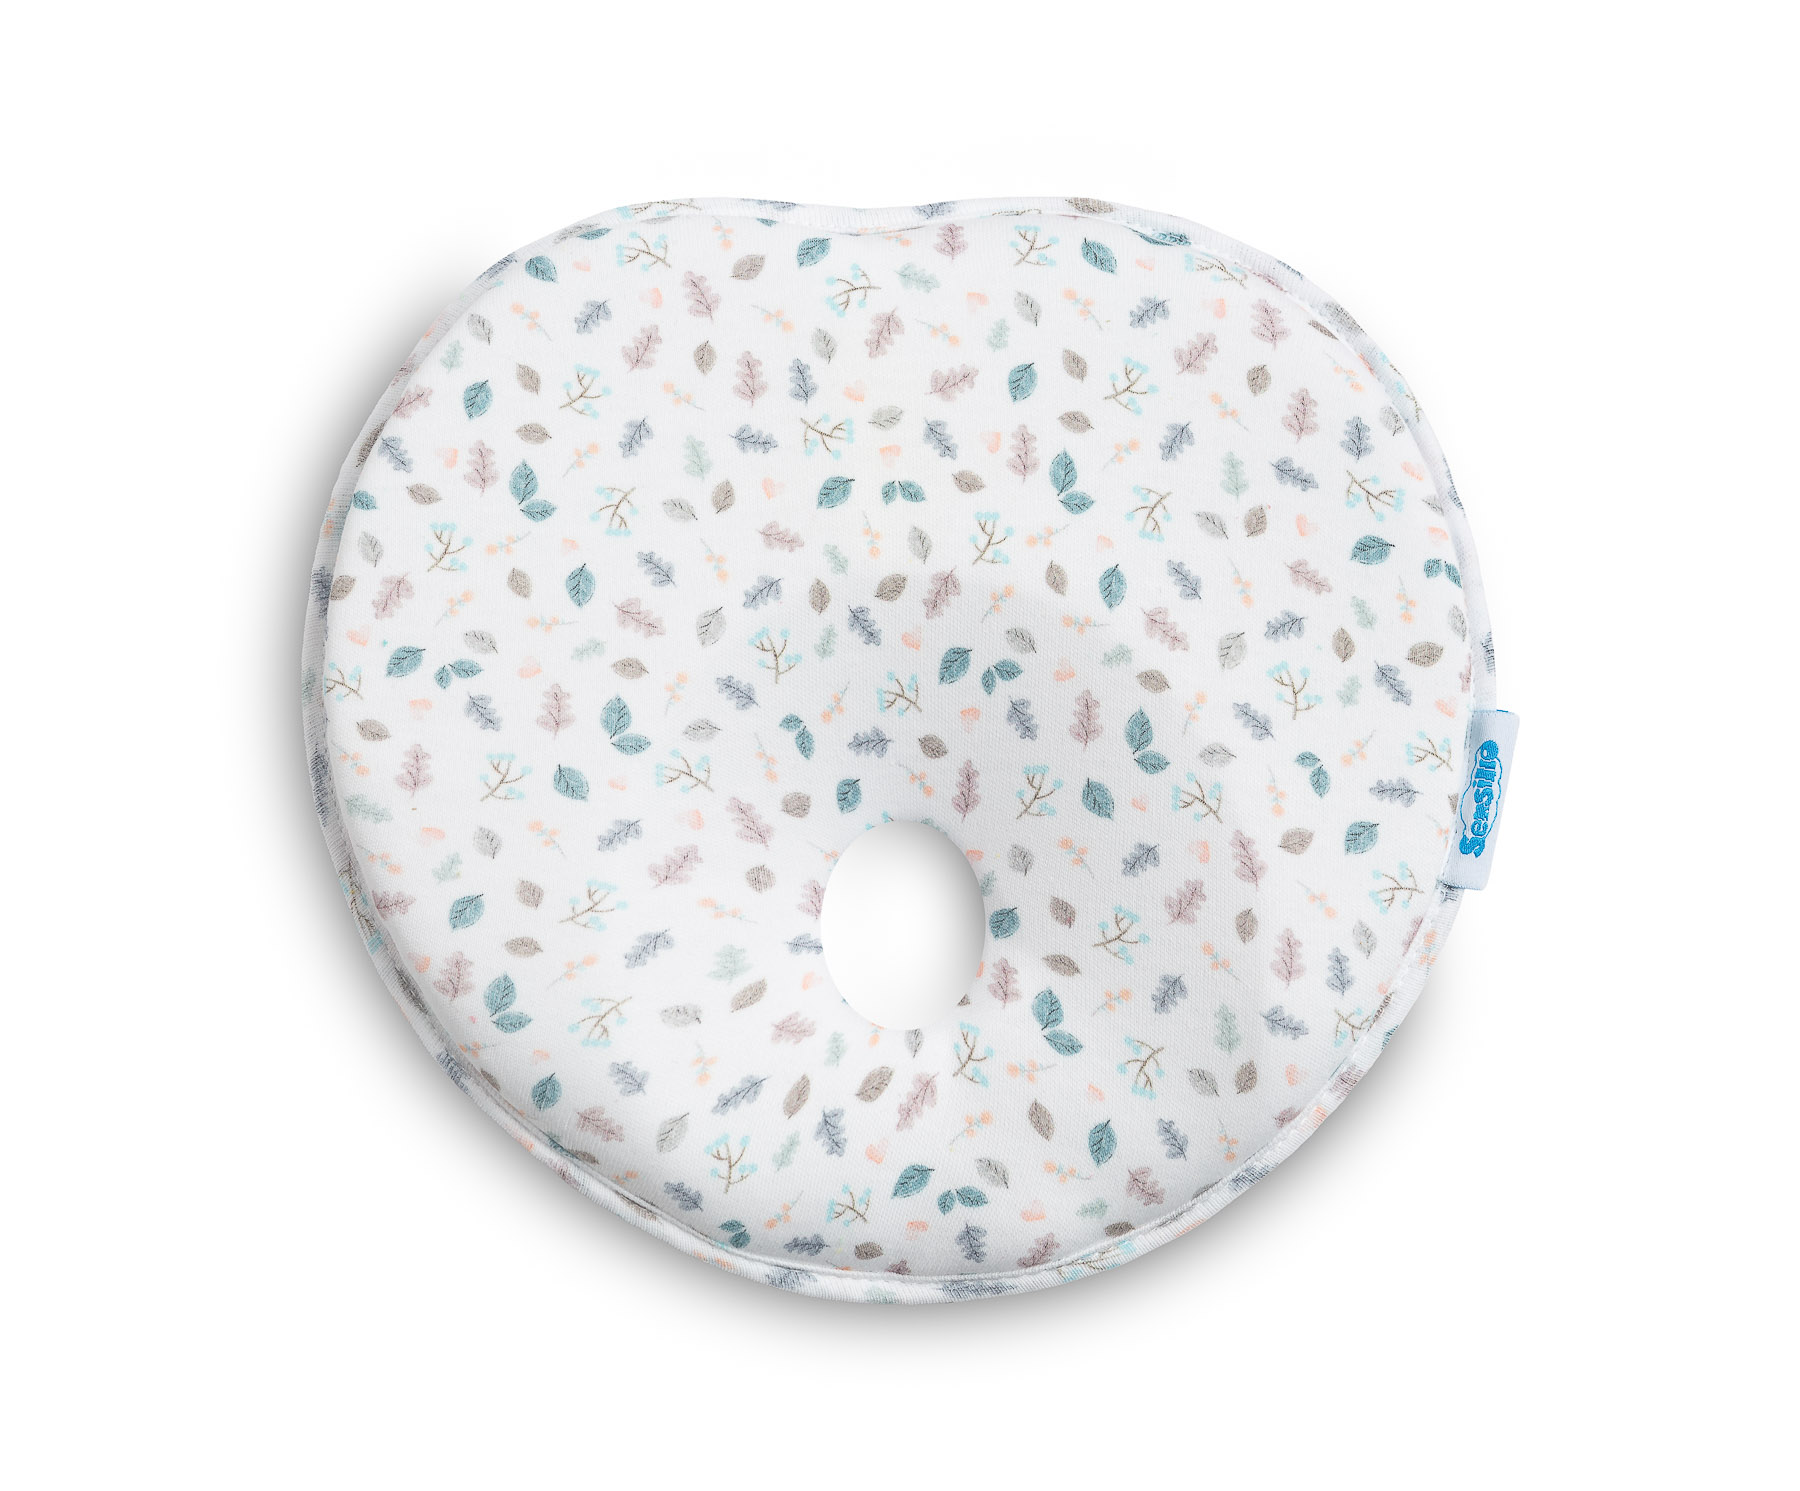 Corrective Pillow – Leaves